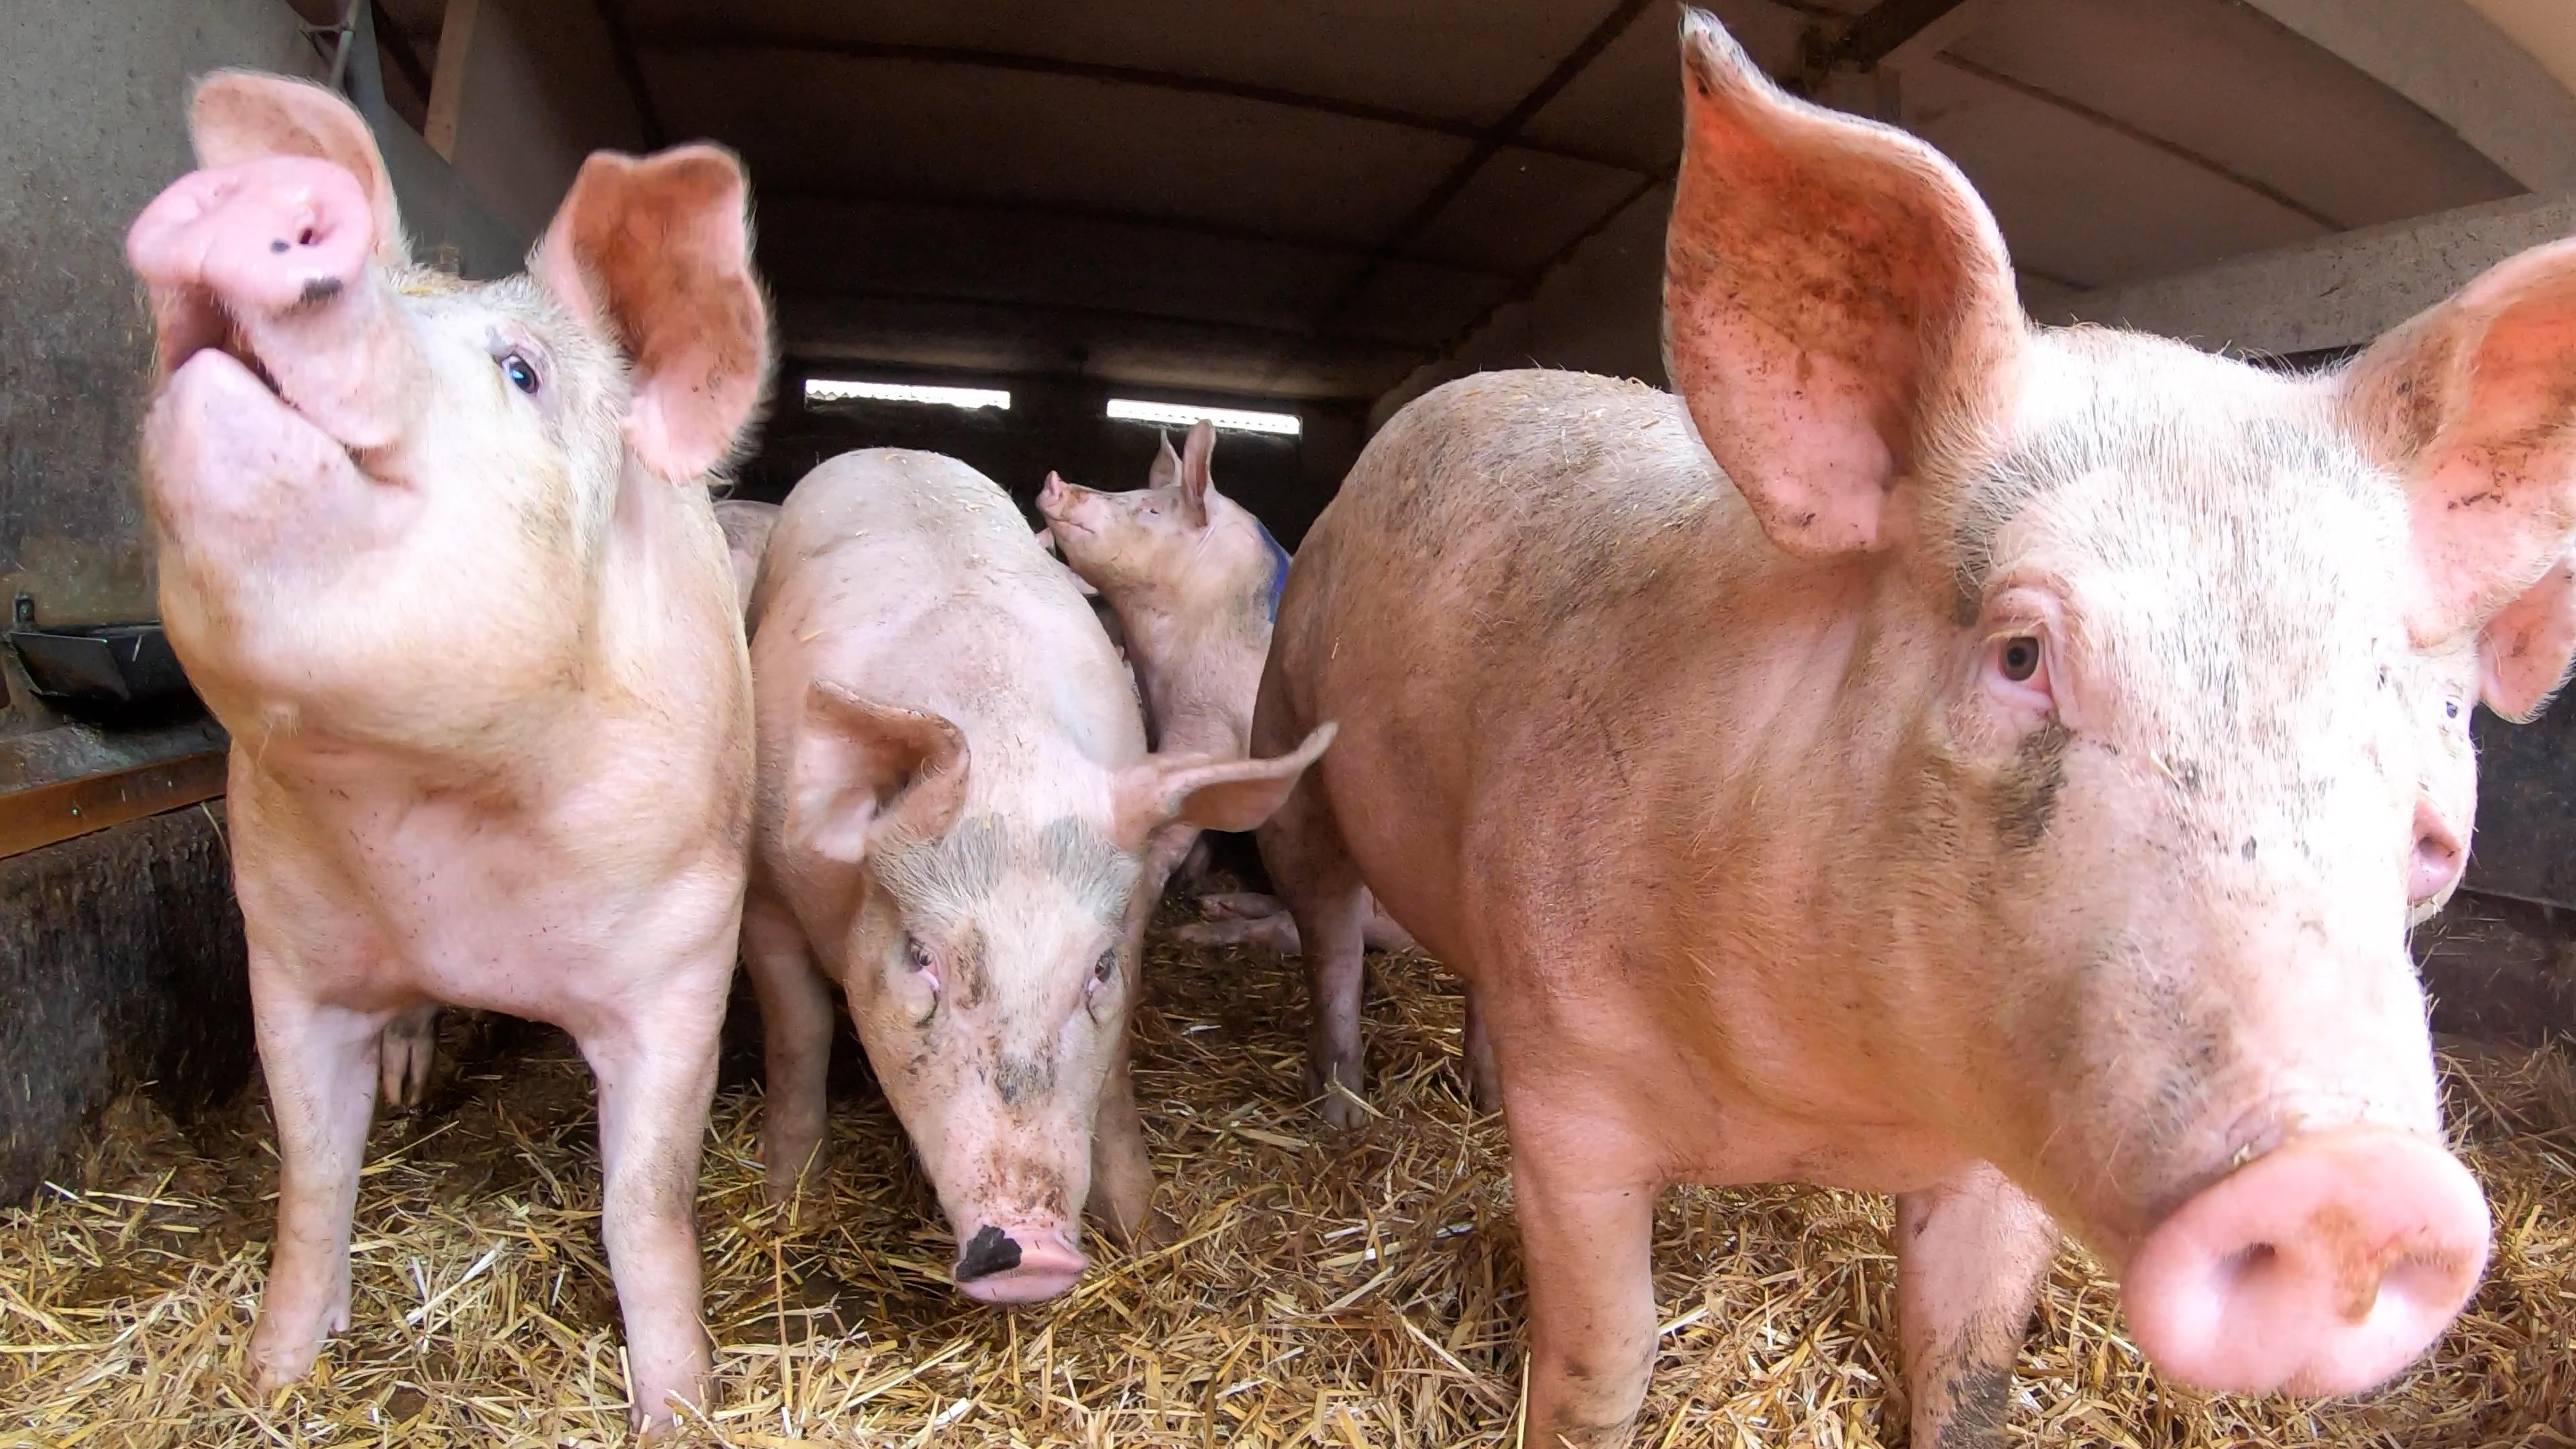 Crisis in pig industry, High costs in farming, Skills shortages, Impact on pig farming, 3840x2160 4K Desktop